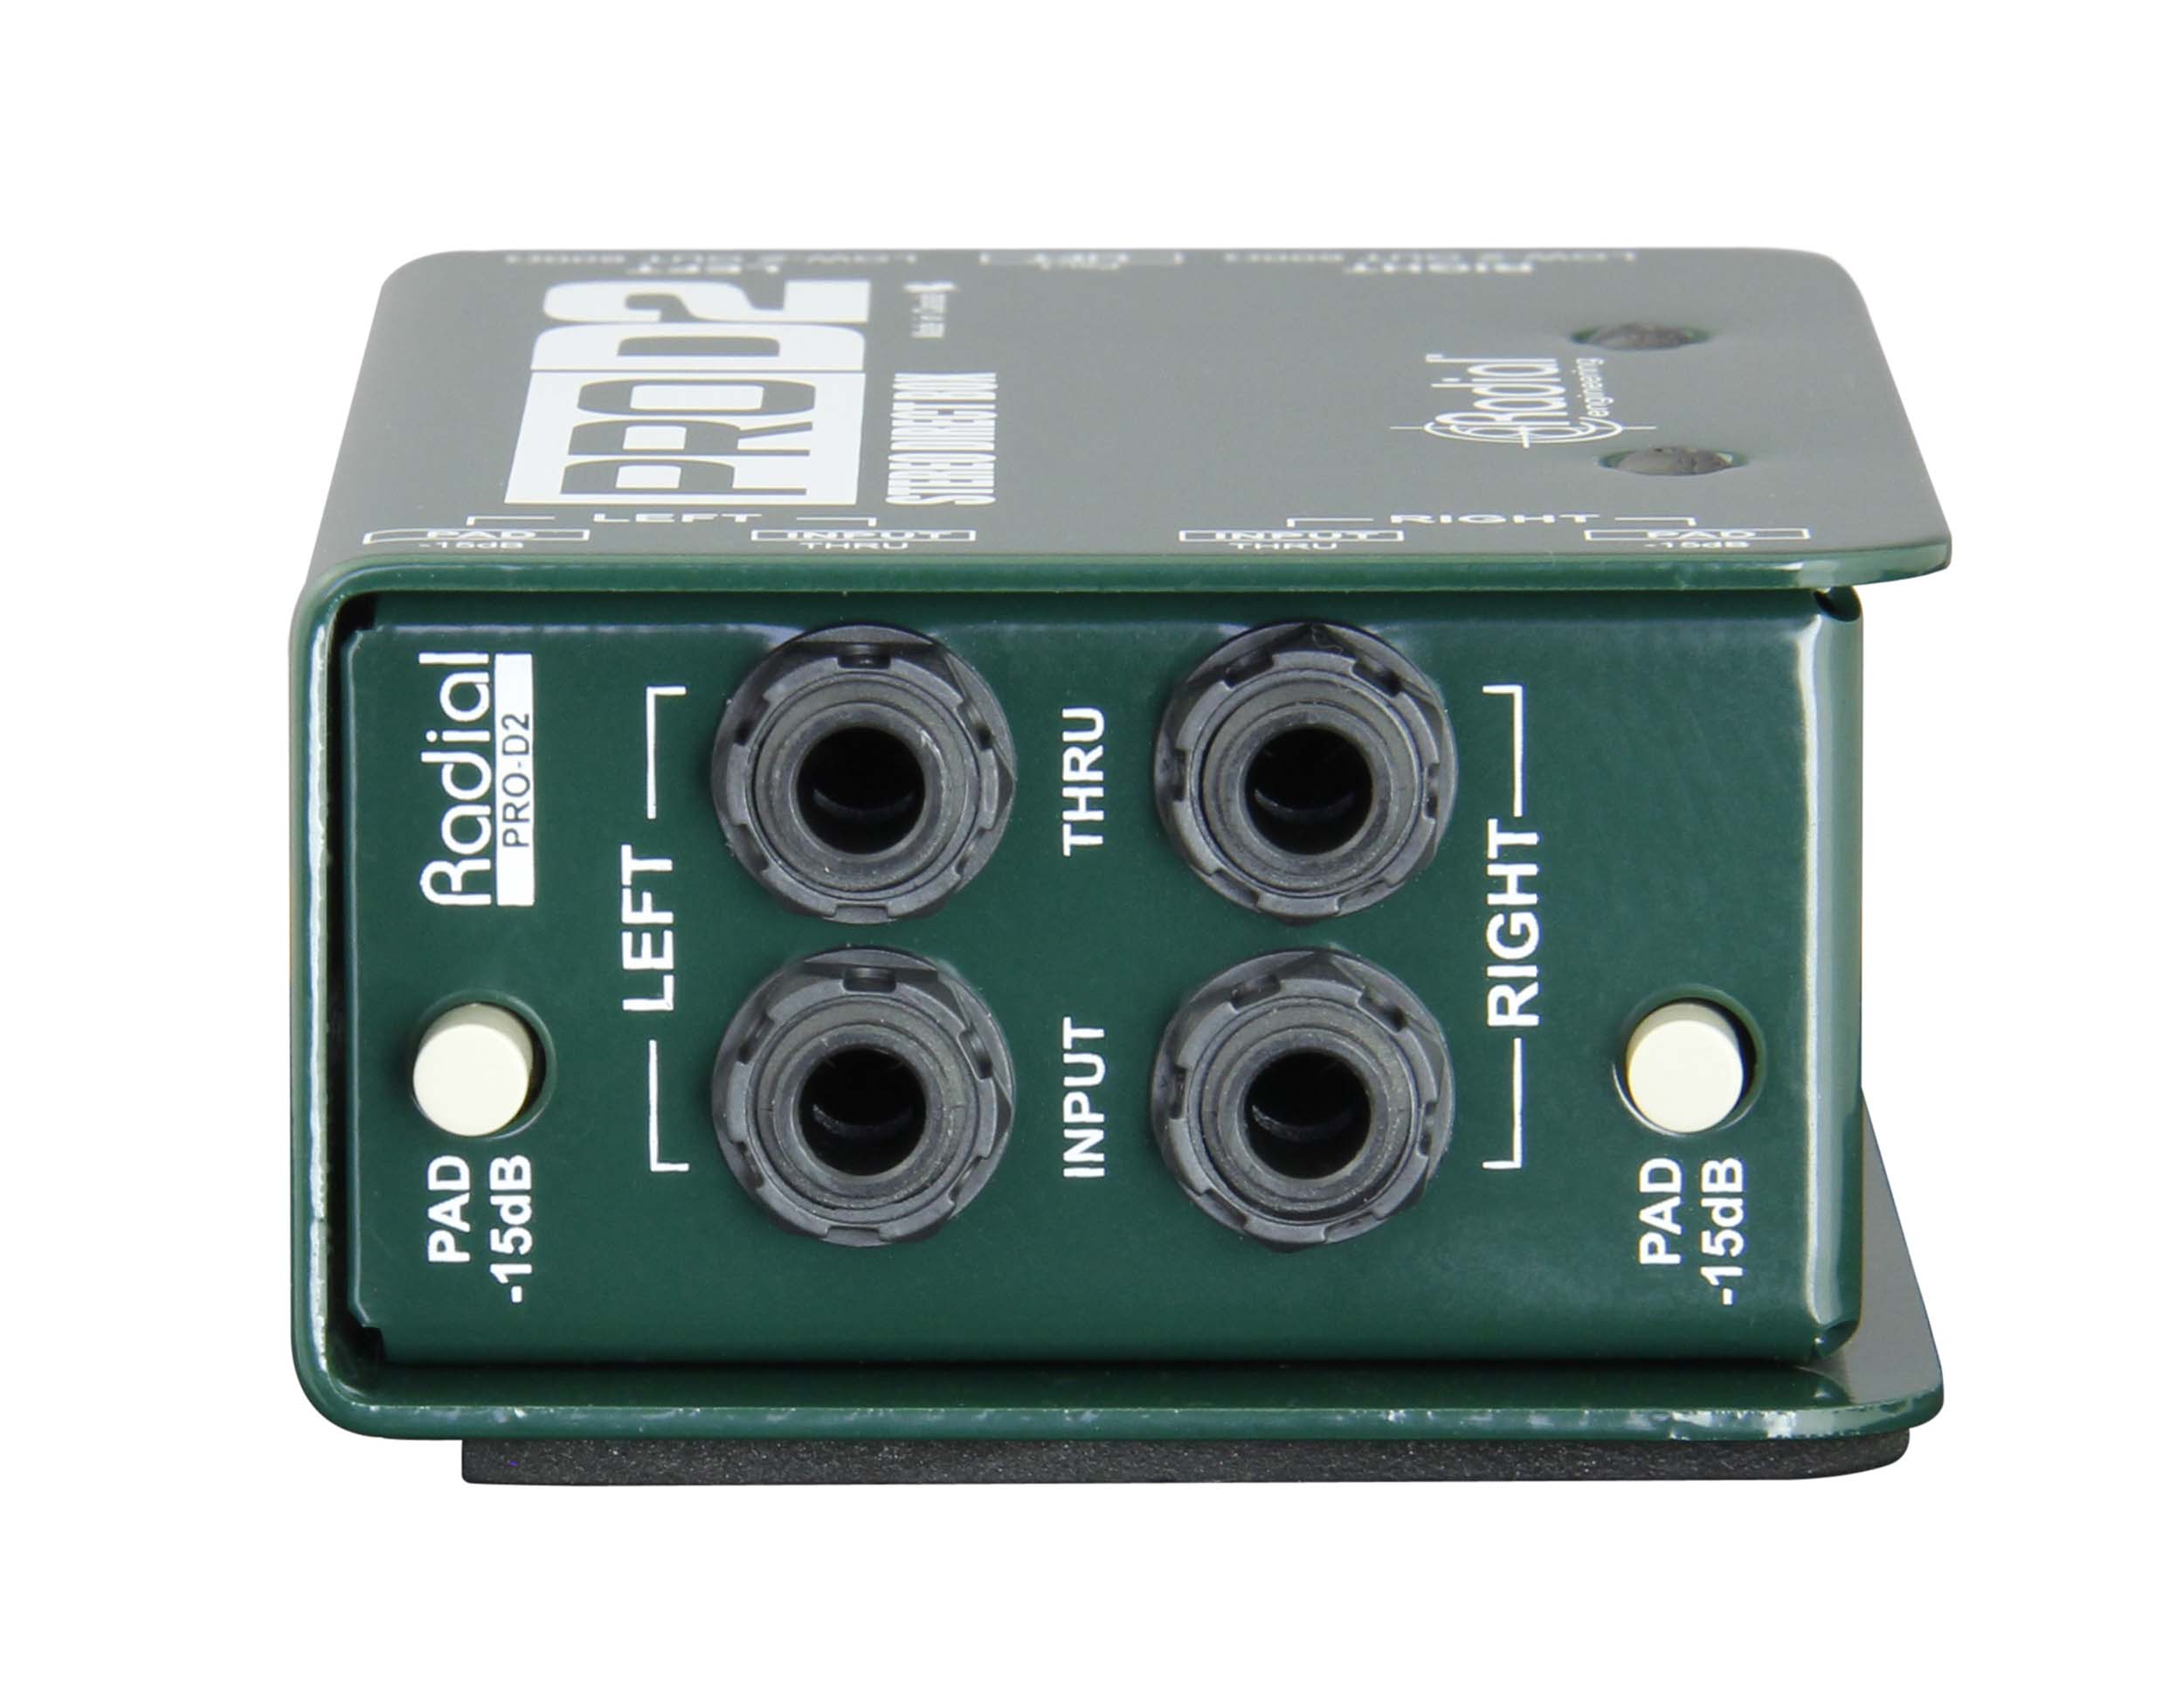 Radial ProD2, Passive DI with Two Channels, Made for High Output Keyboards by Radial Engineering